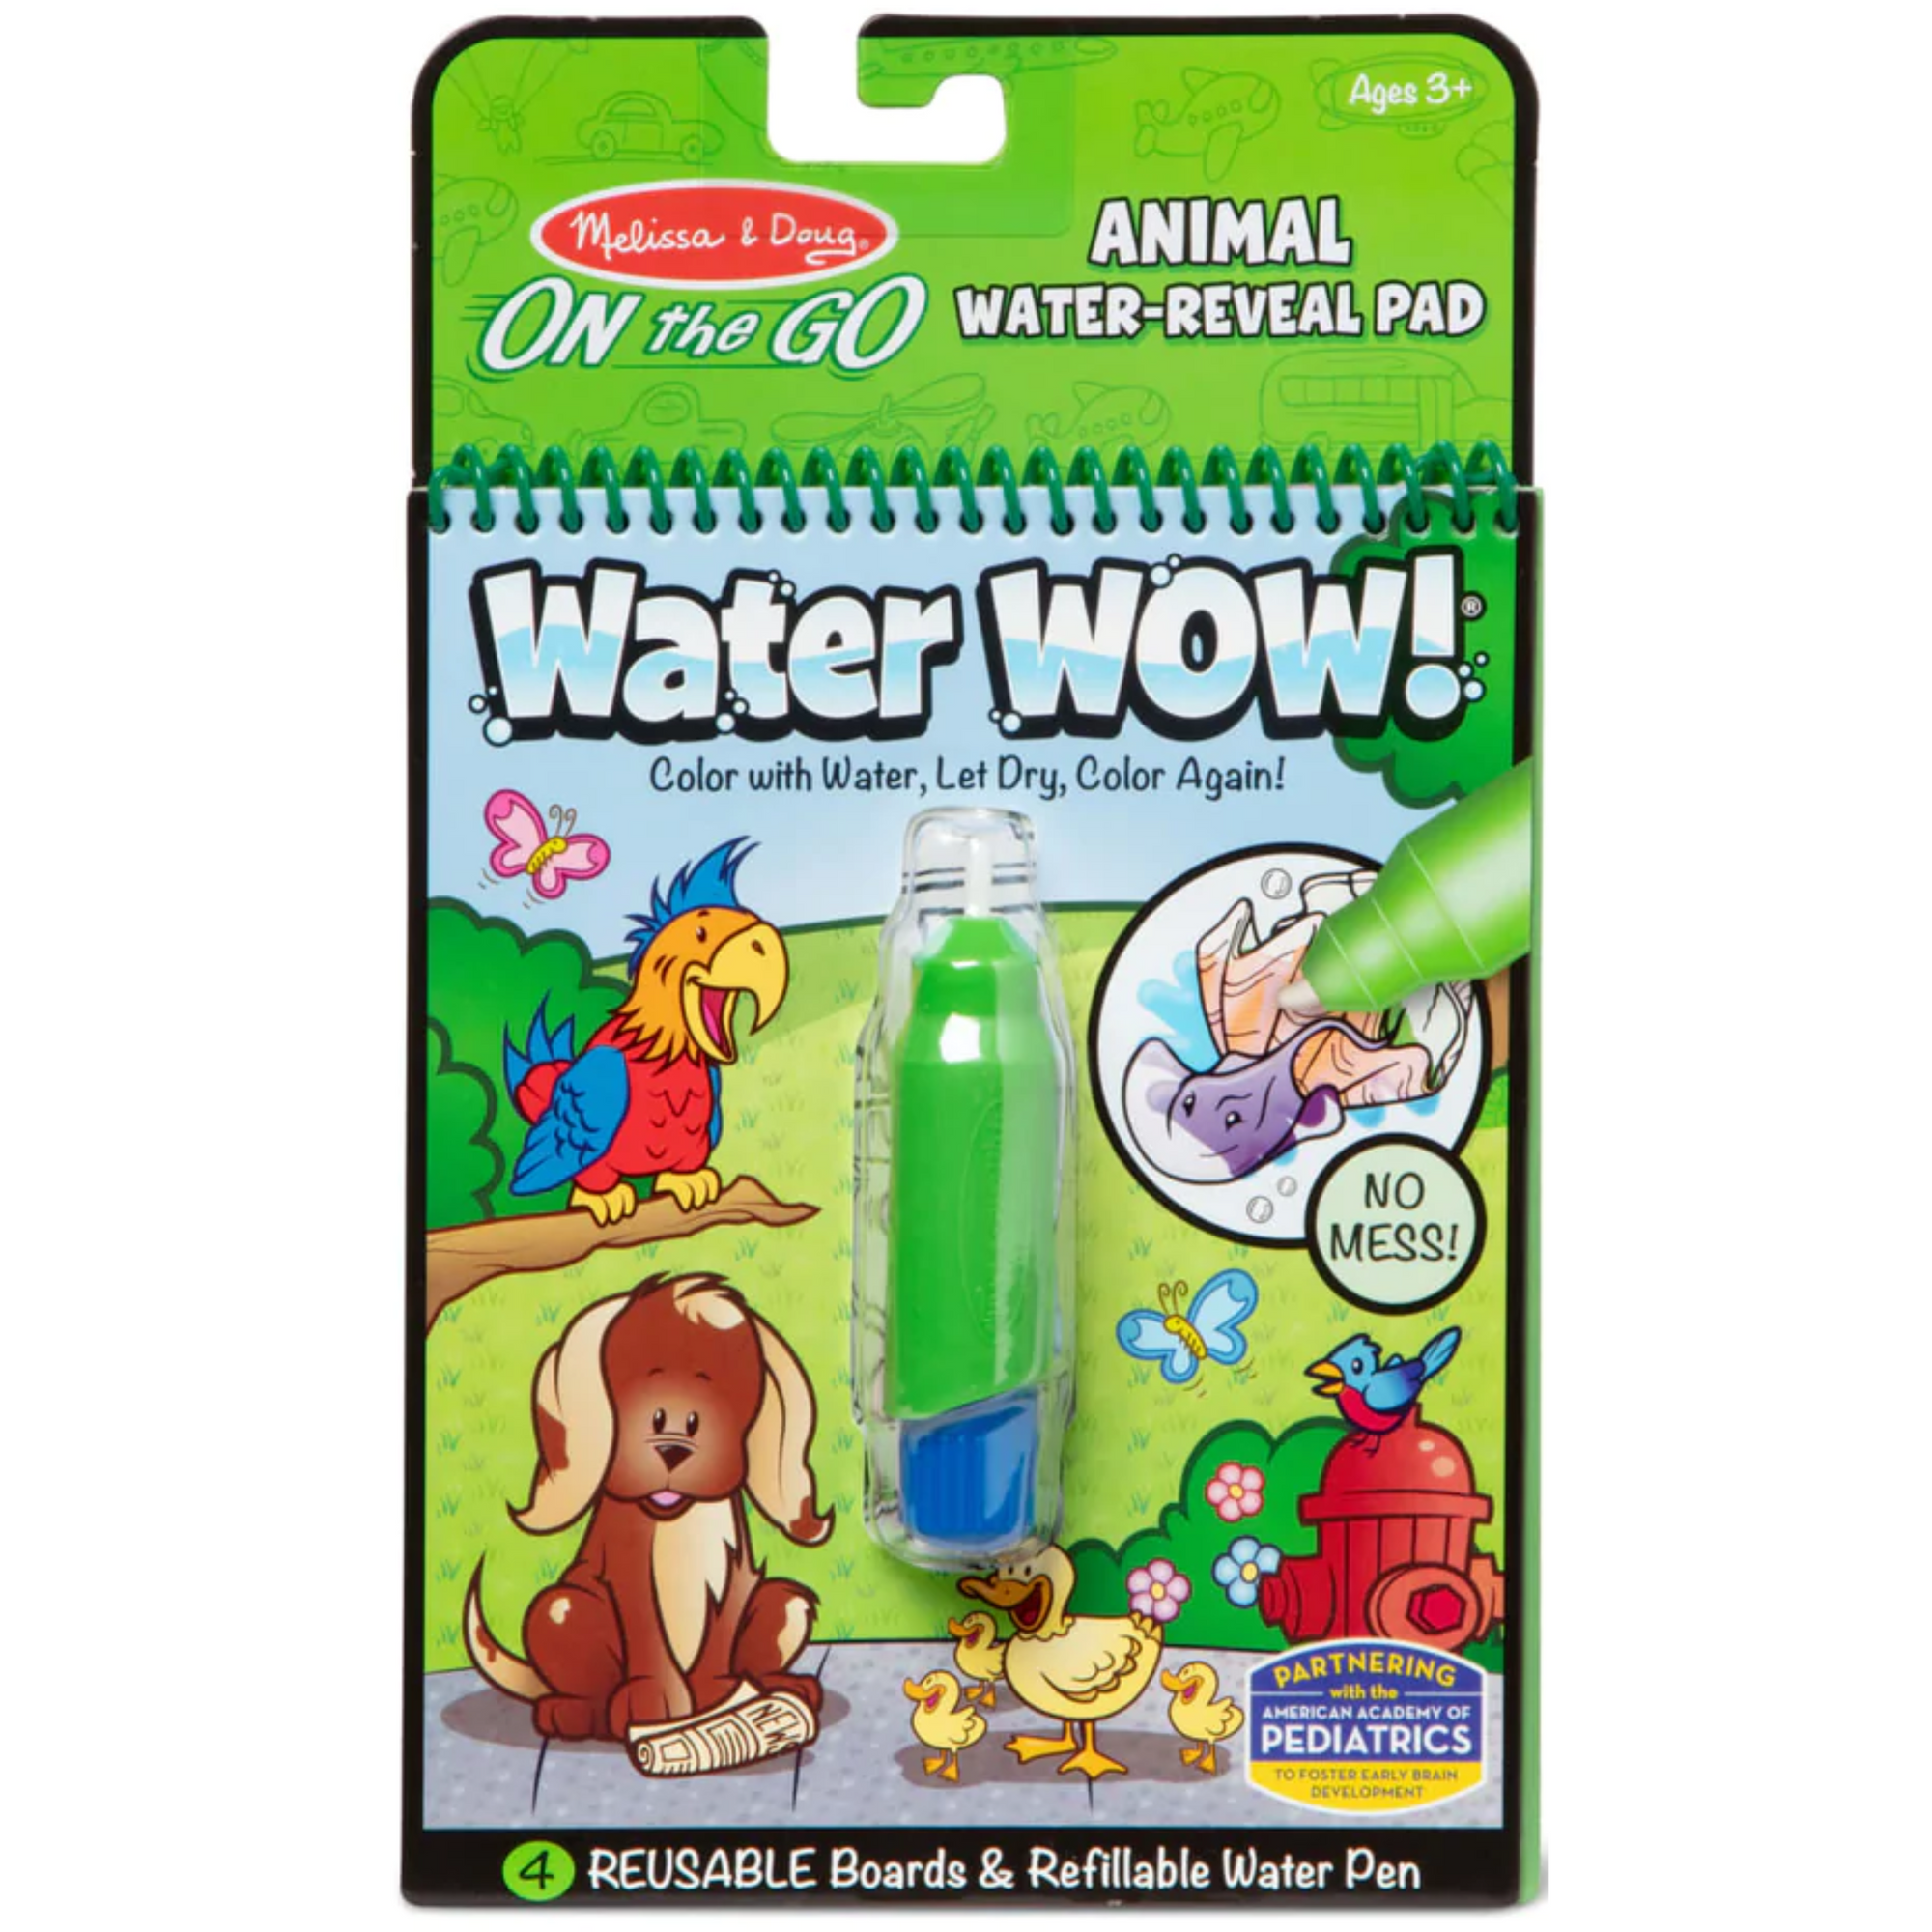 Water Wow animales